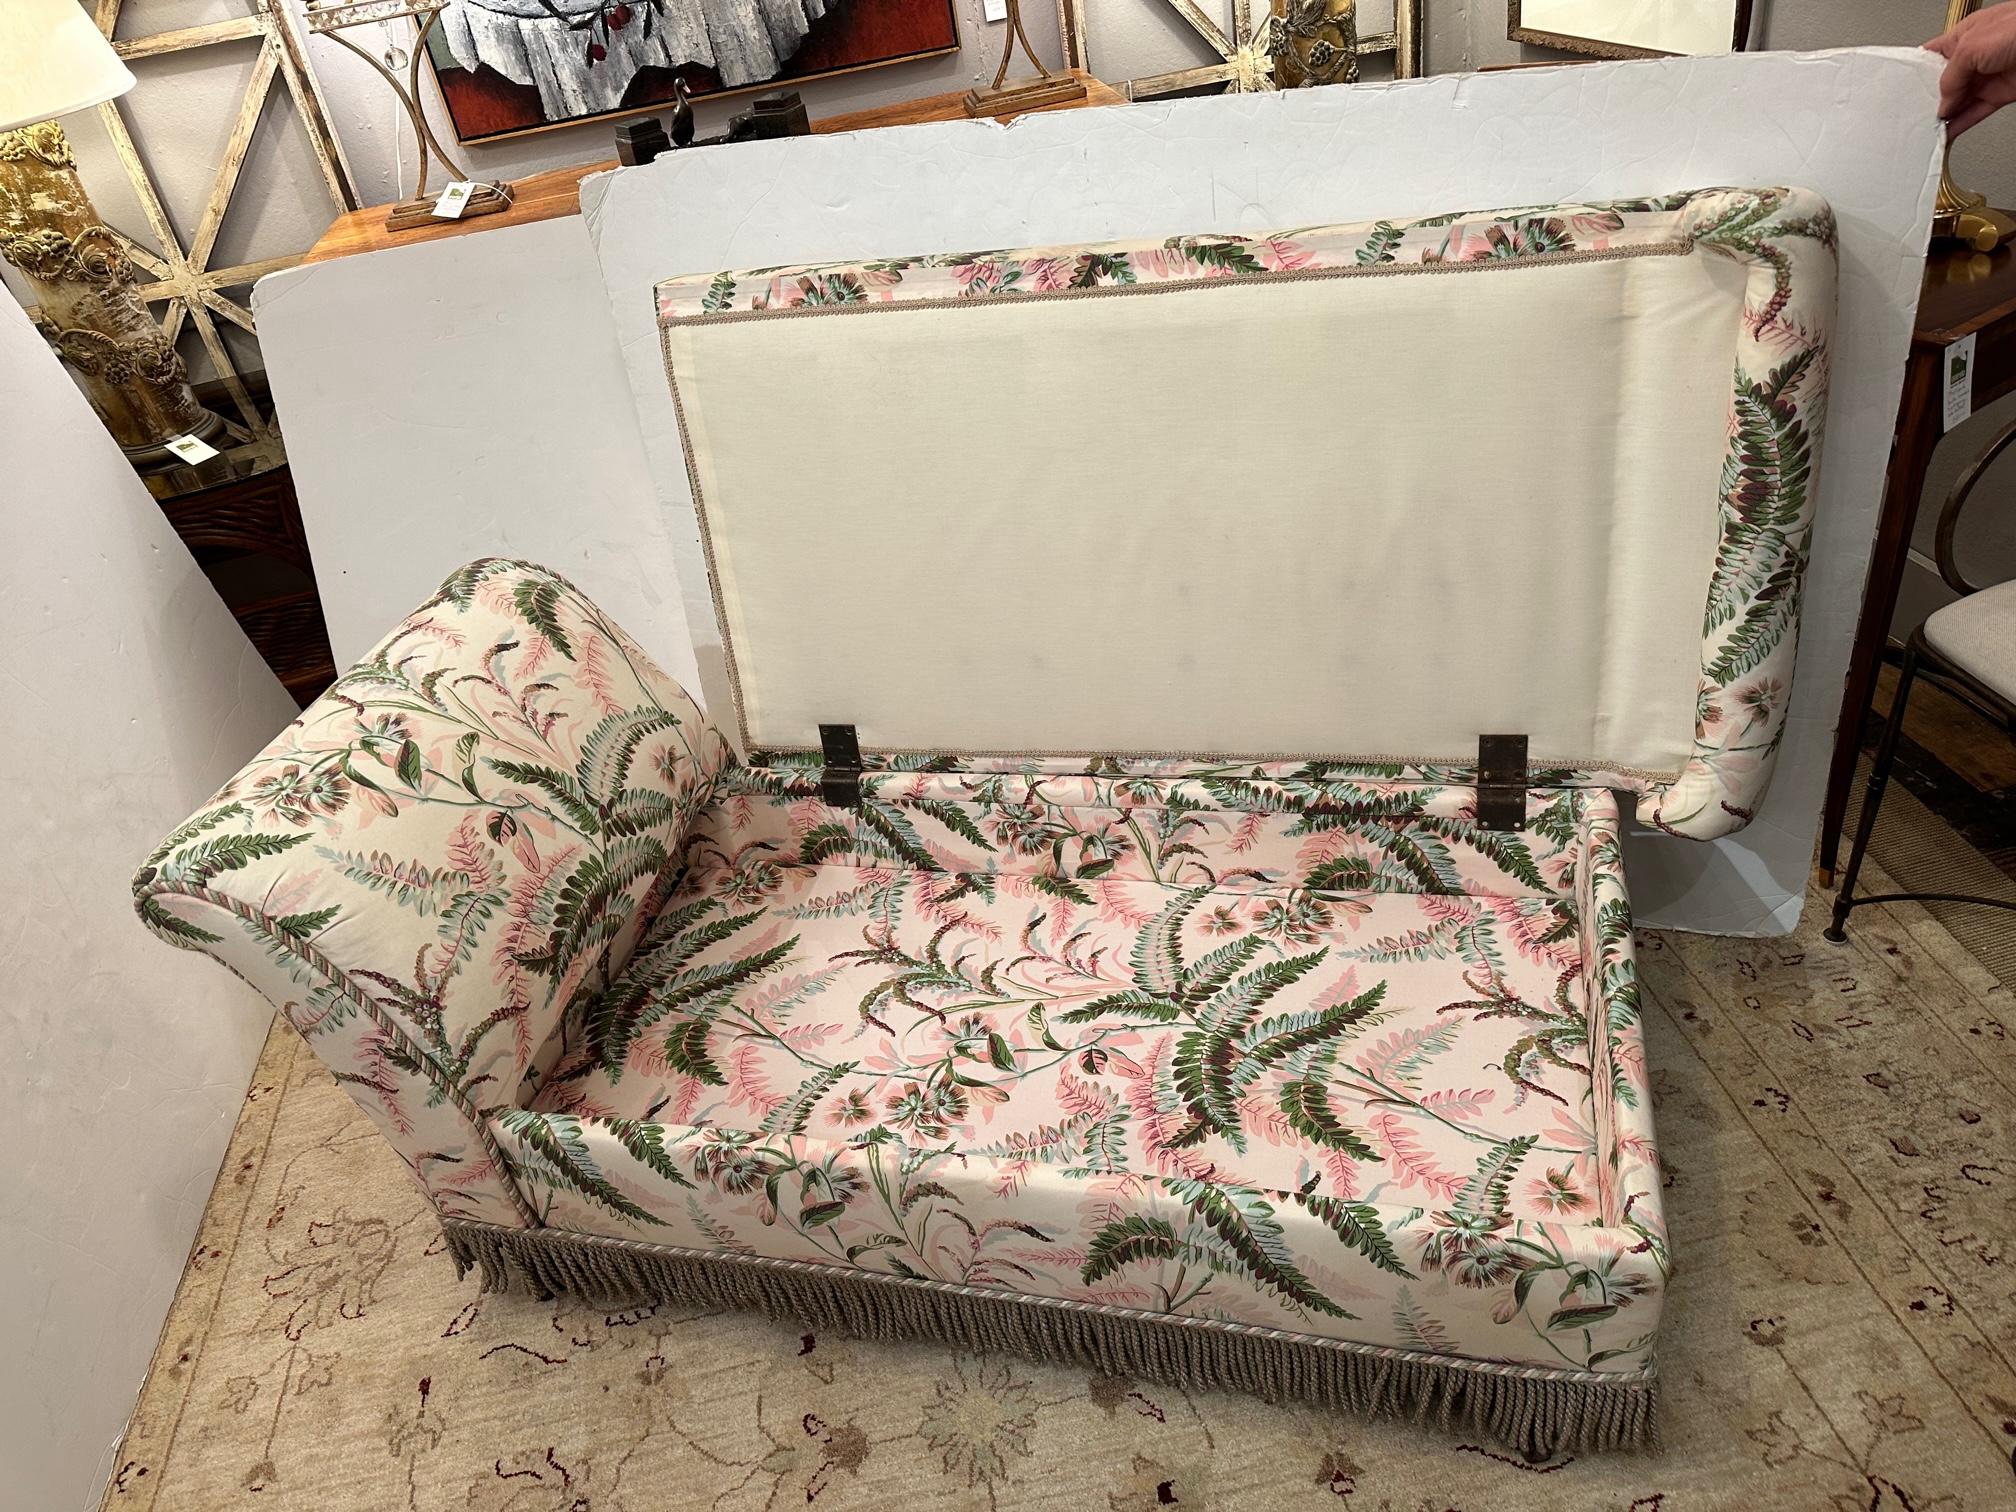 Darling small and comfy chaise longue upholstered in pretty tropical leaf motif cotton in pale pink, greens and cream, finished with bouillon fringe and a decorative rope. A surprising and helpful touch: the seat lifts up to reveal storage space